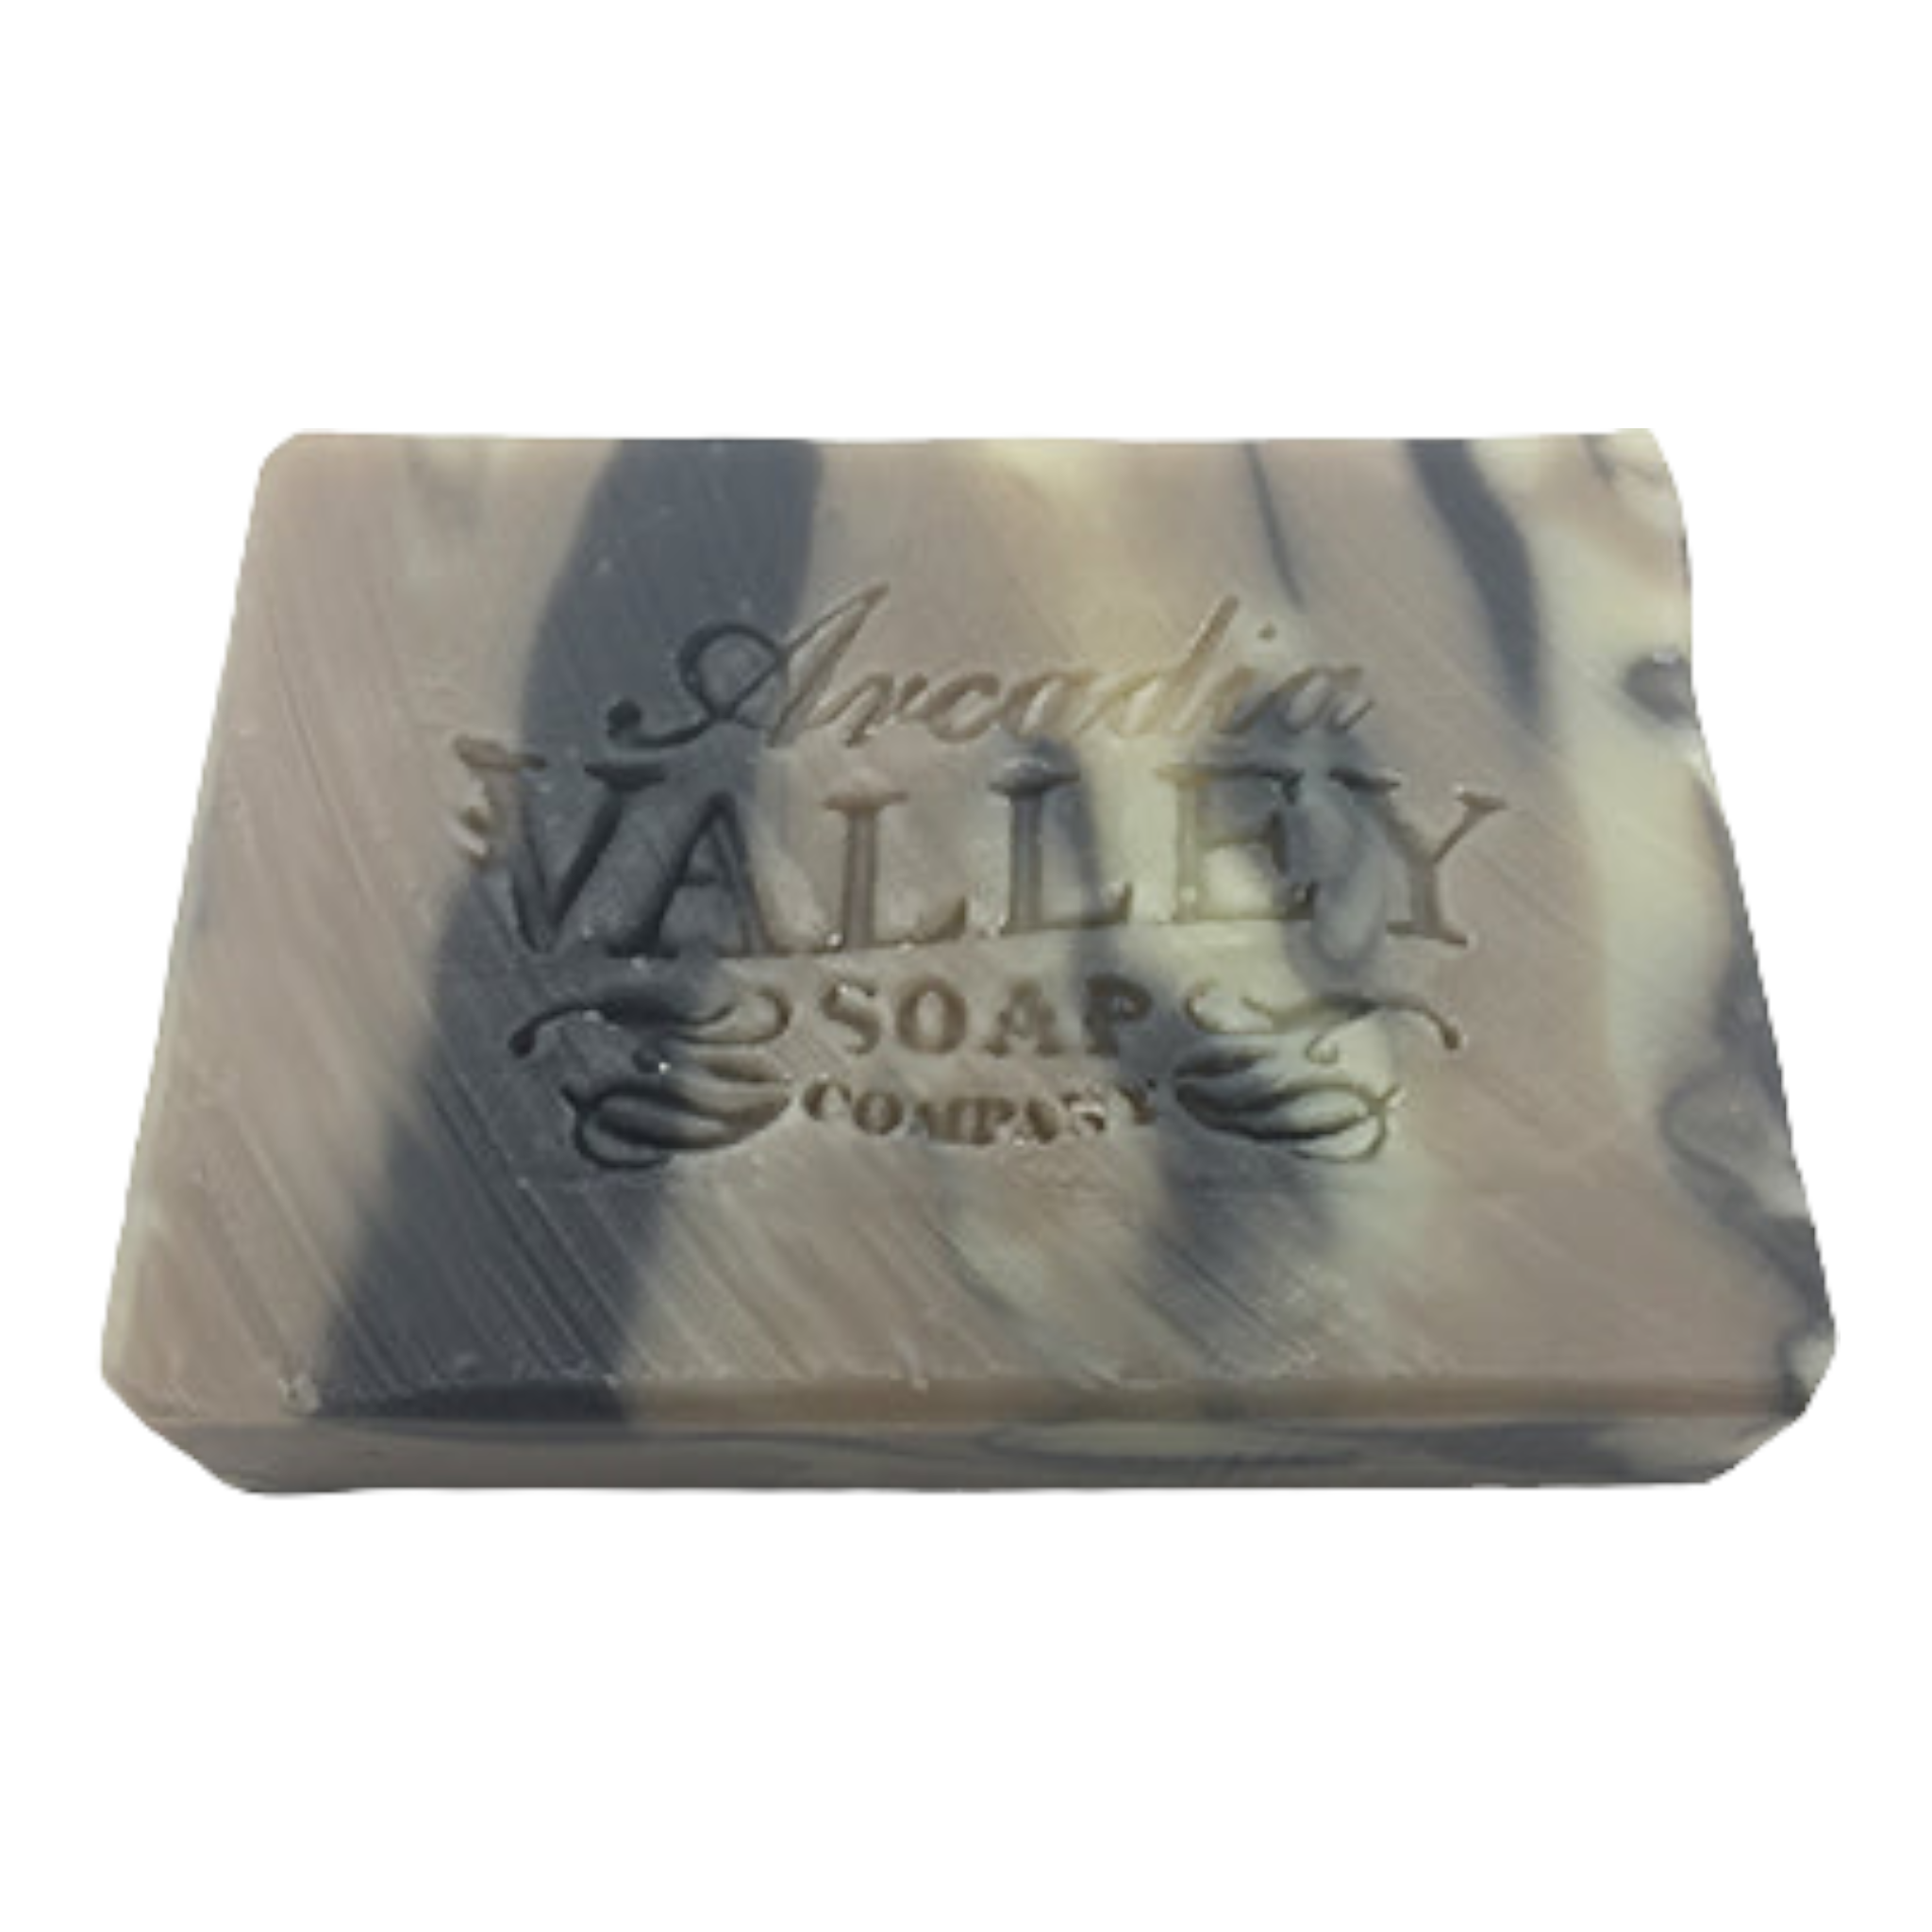 Old Plank Road Patchouli Soap